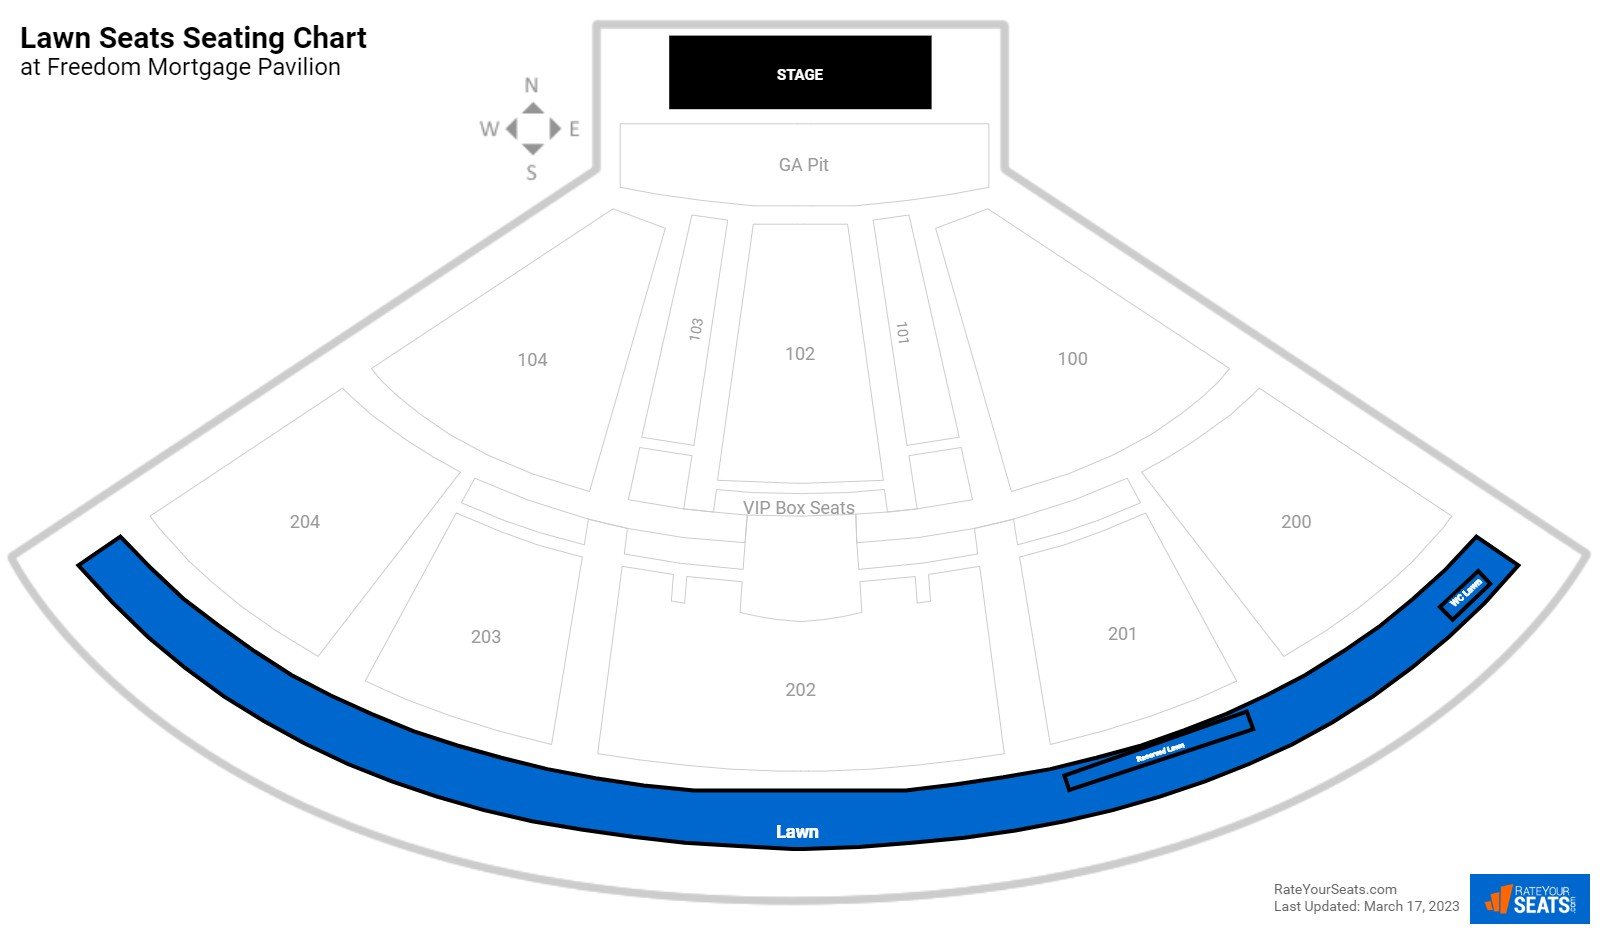 Concert Lawn Seats Seating Chart at Freedom Mortgage Pavilion